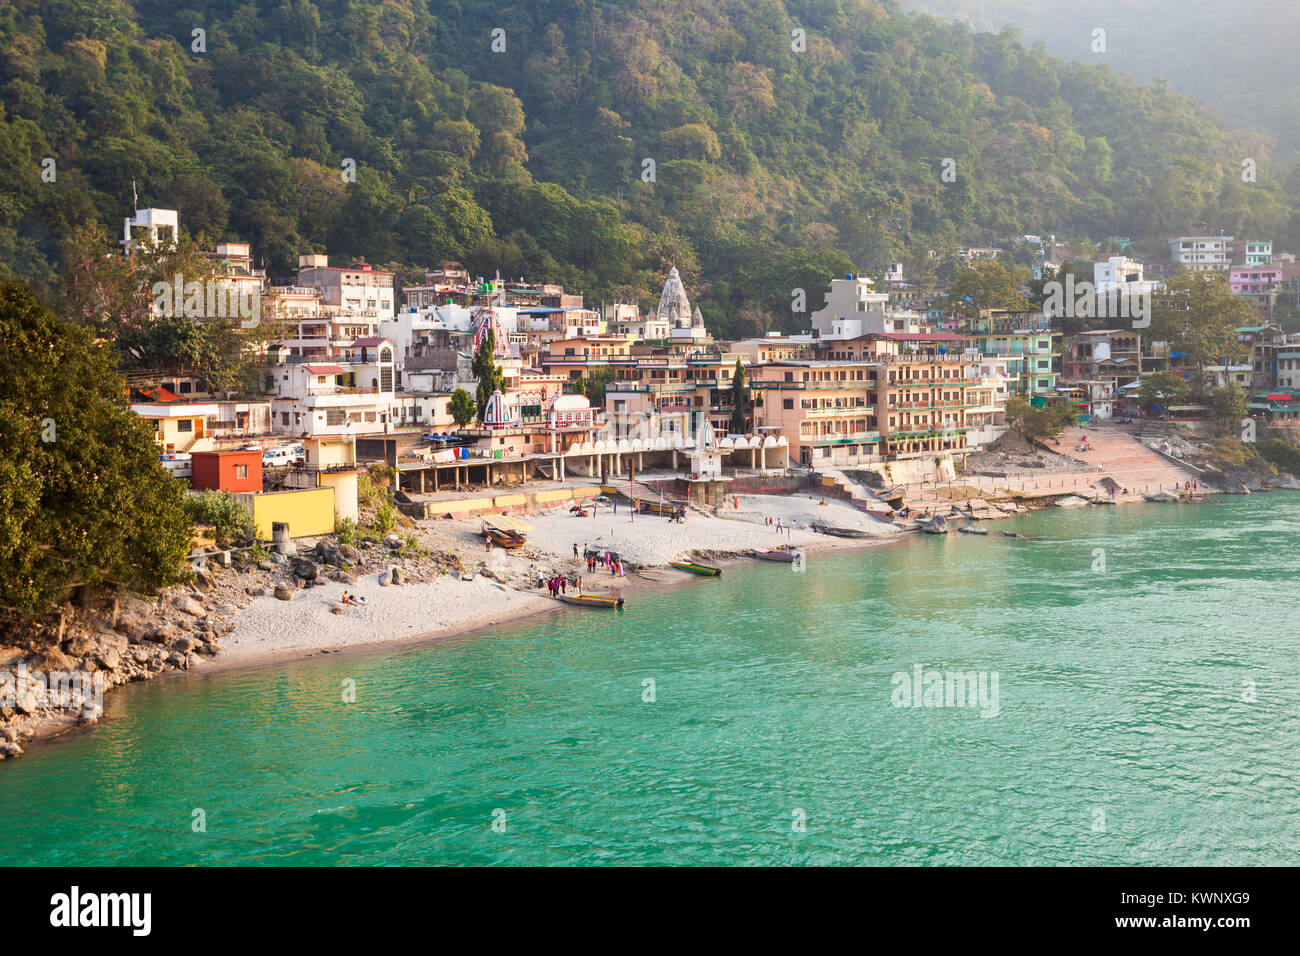 Rishikesh is a city in Dehradun district of Uttarakhand state in nothern India. It is known as the Yoga Capital of the World. Stock Photo